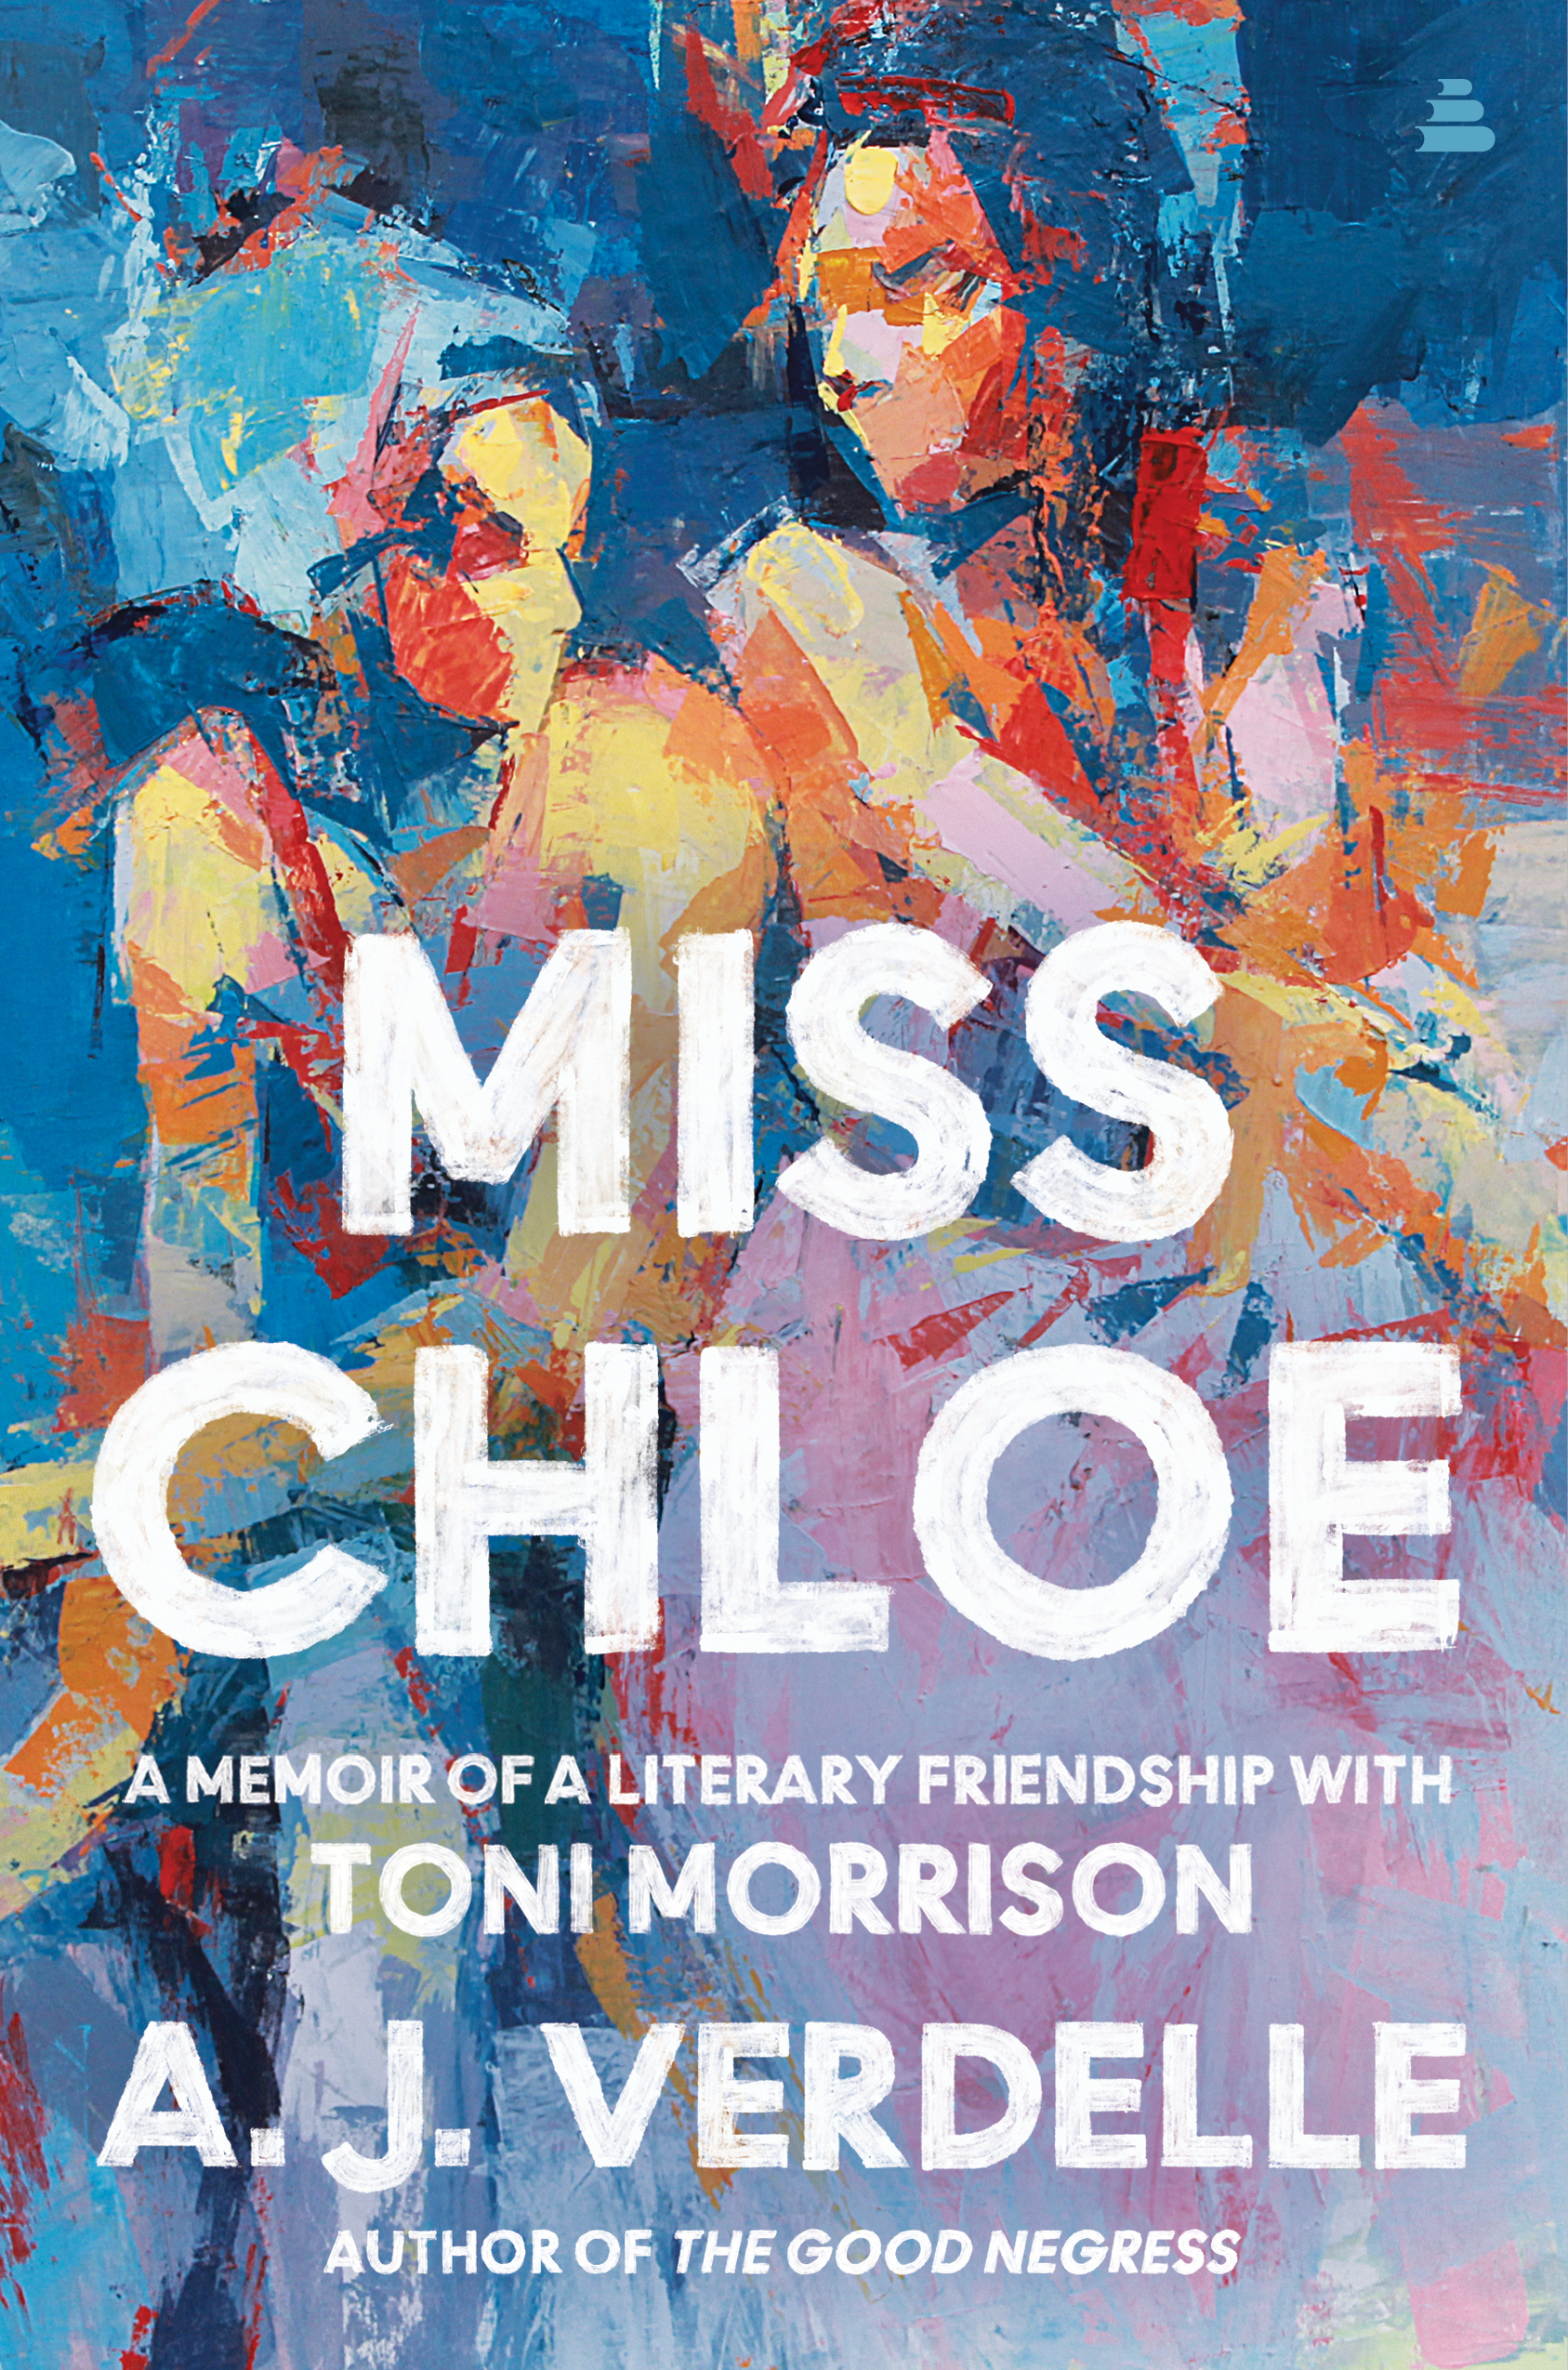 "Miss Chloe" book cover with abstract oil painting of two women